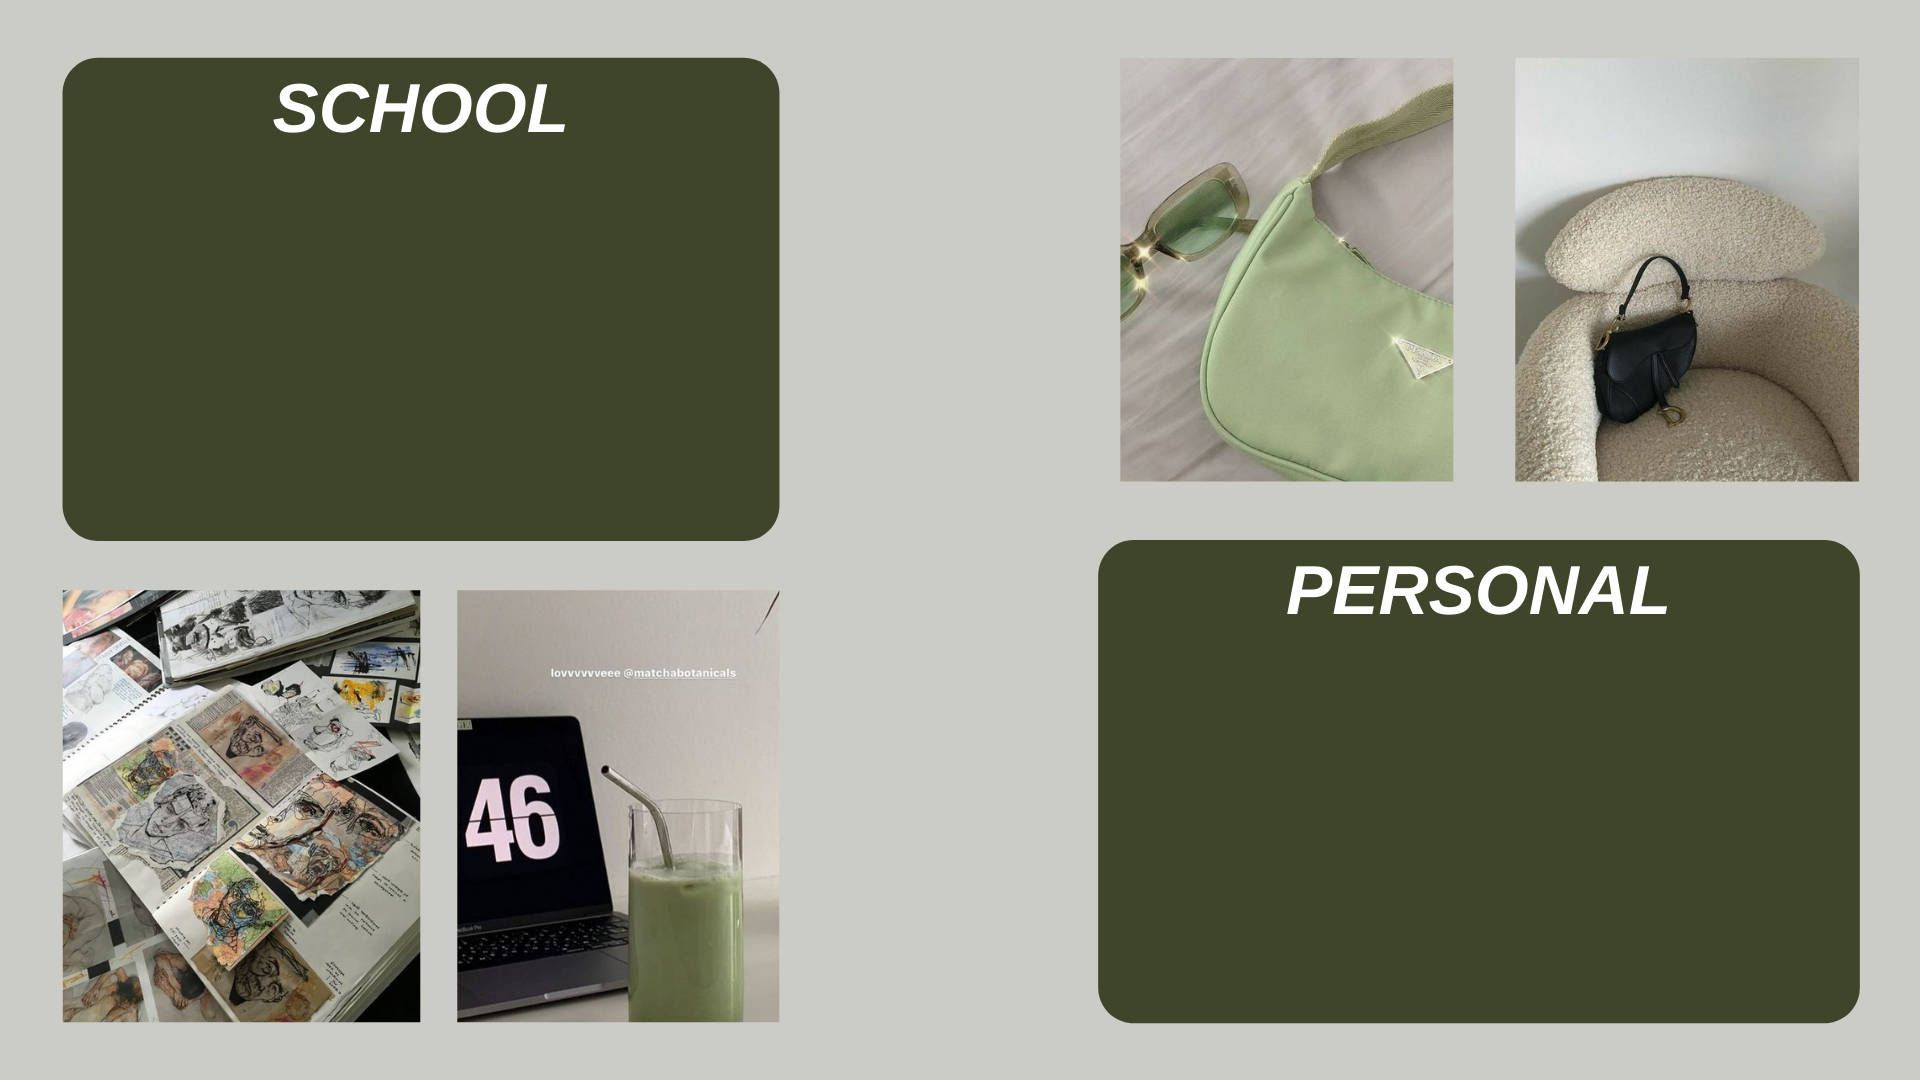 School personal items with a green background - School